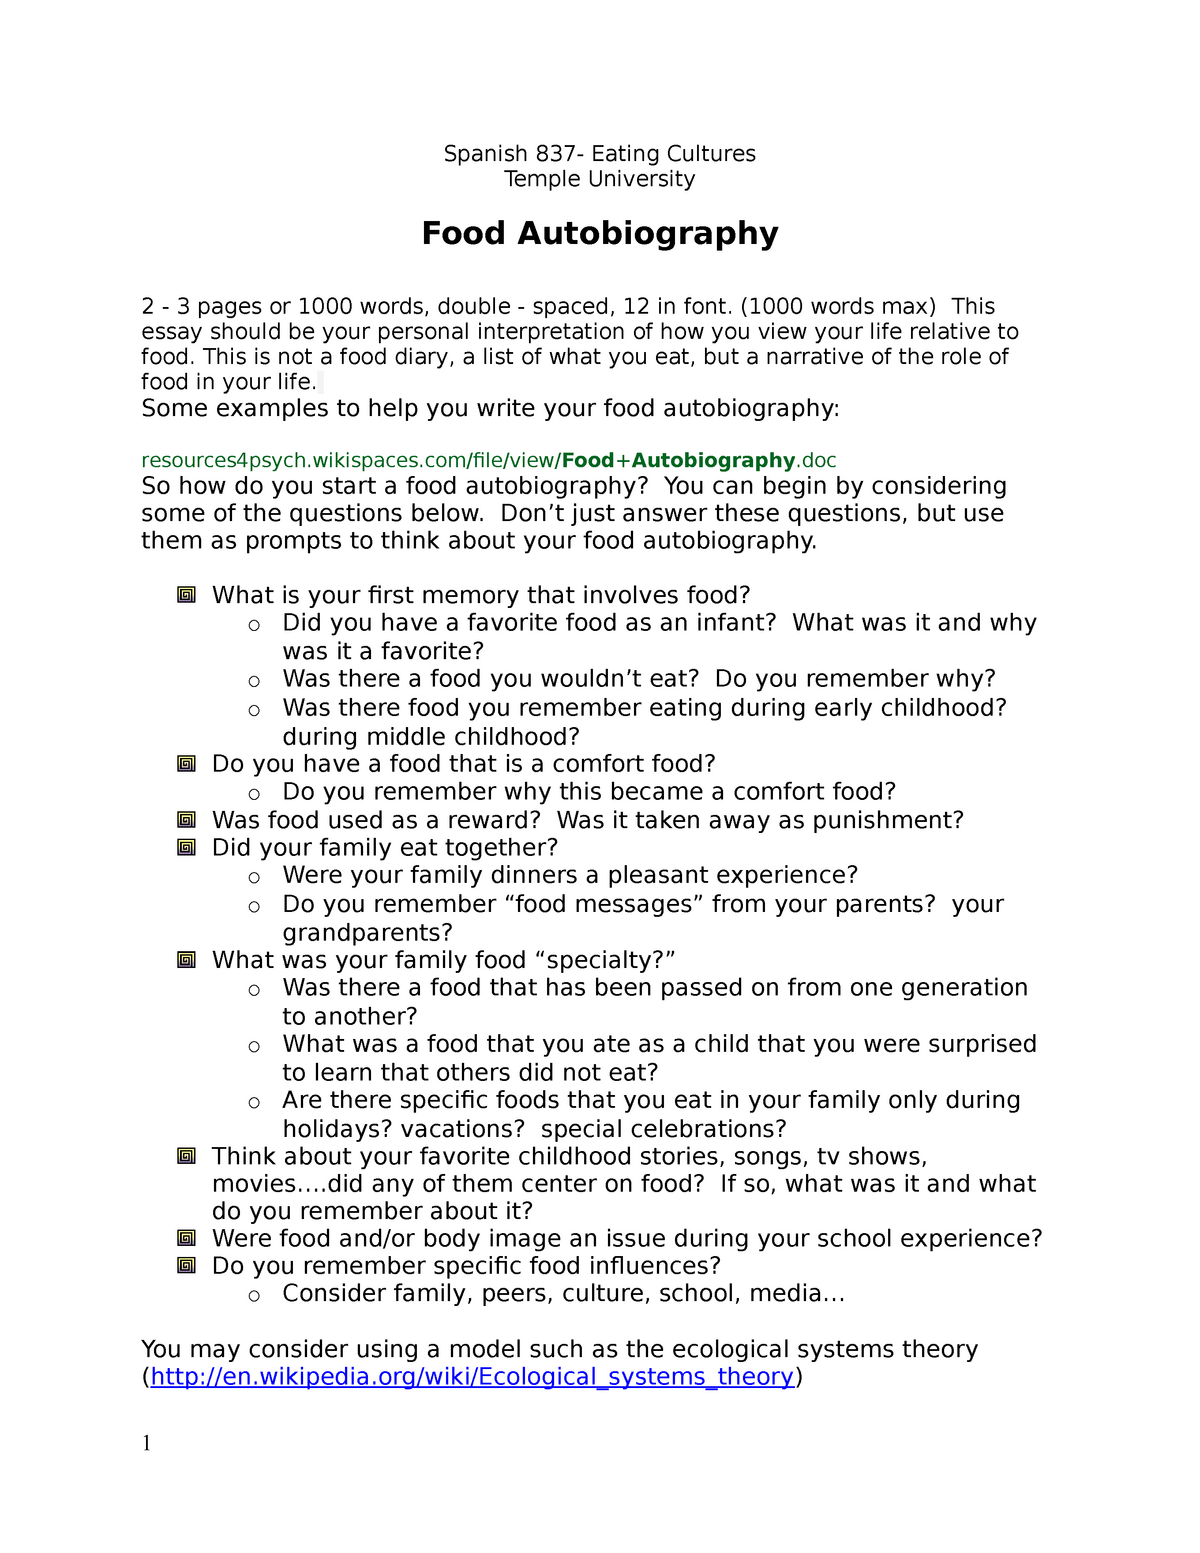 Food Autobiography - Grade: A+ - ENG 30 - Eating Cultures